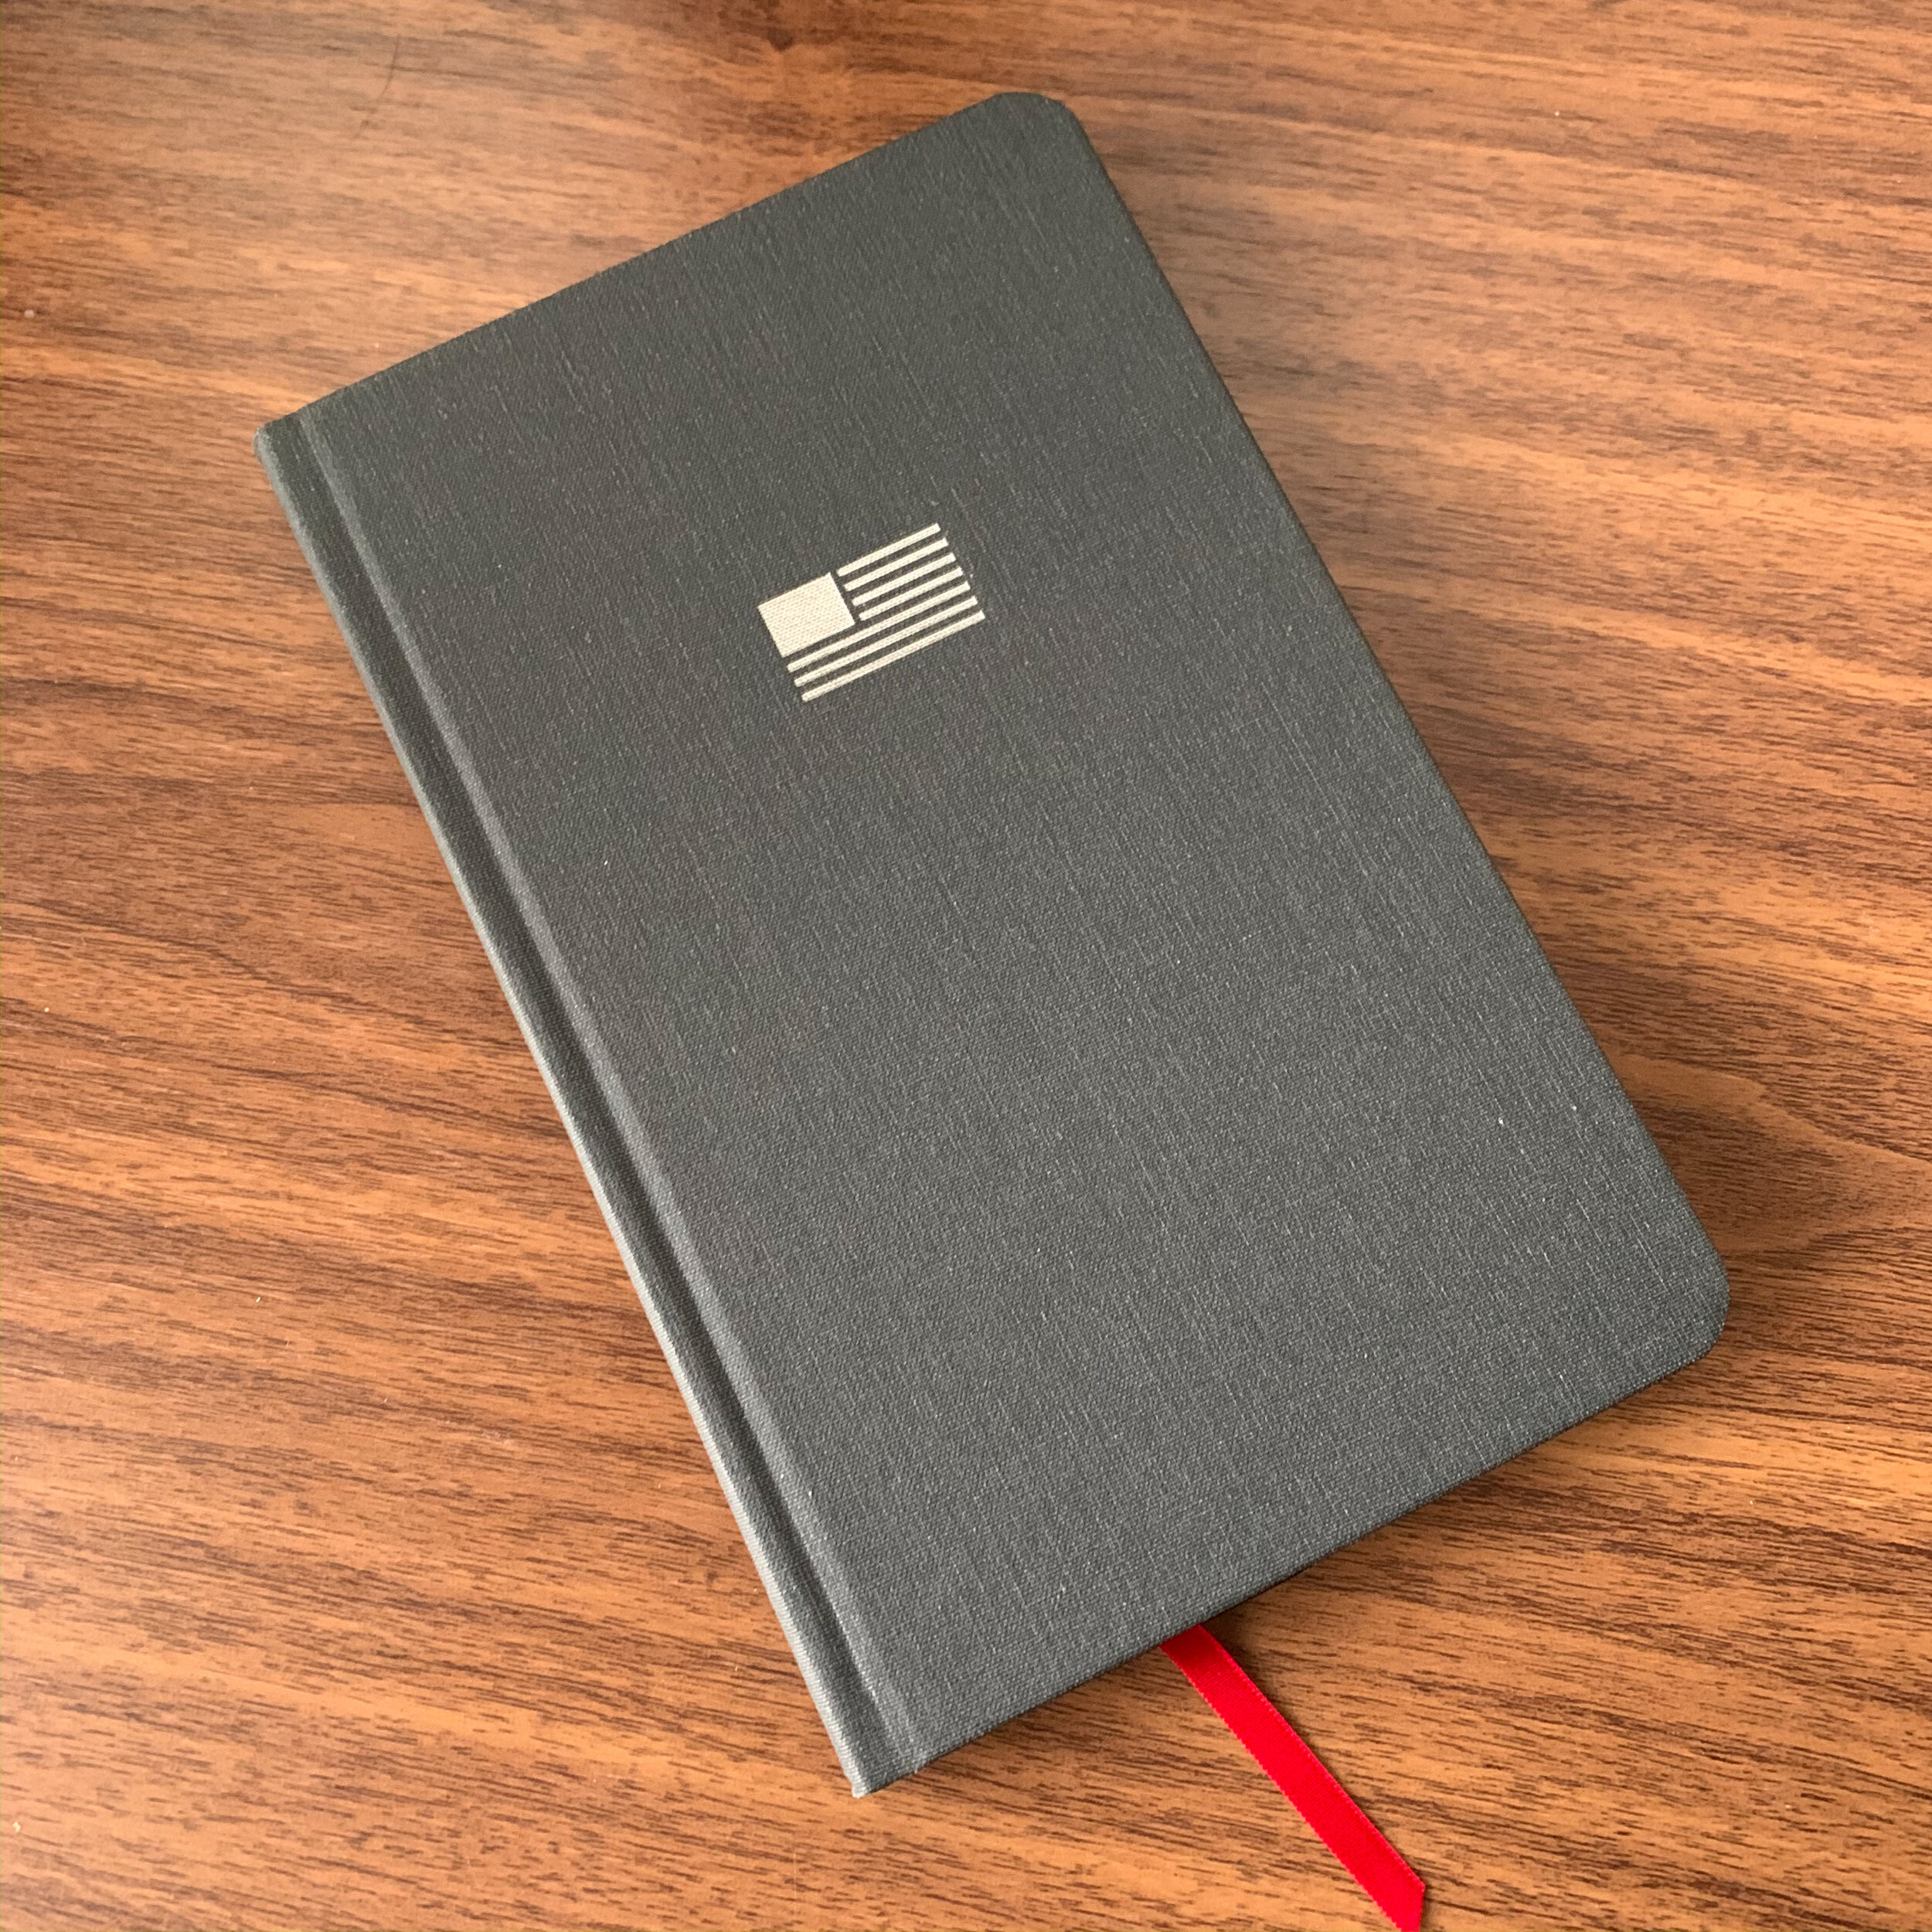 Notebook Review: Oxford USA Hardcover Journal — The Gentleman